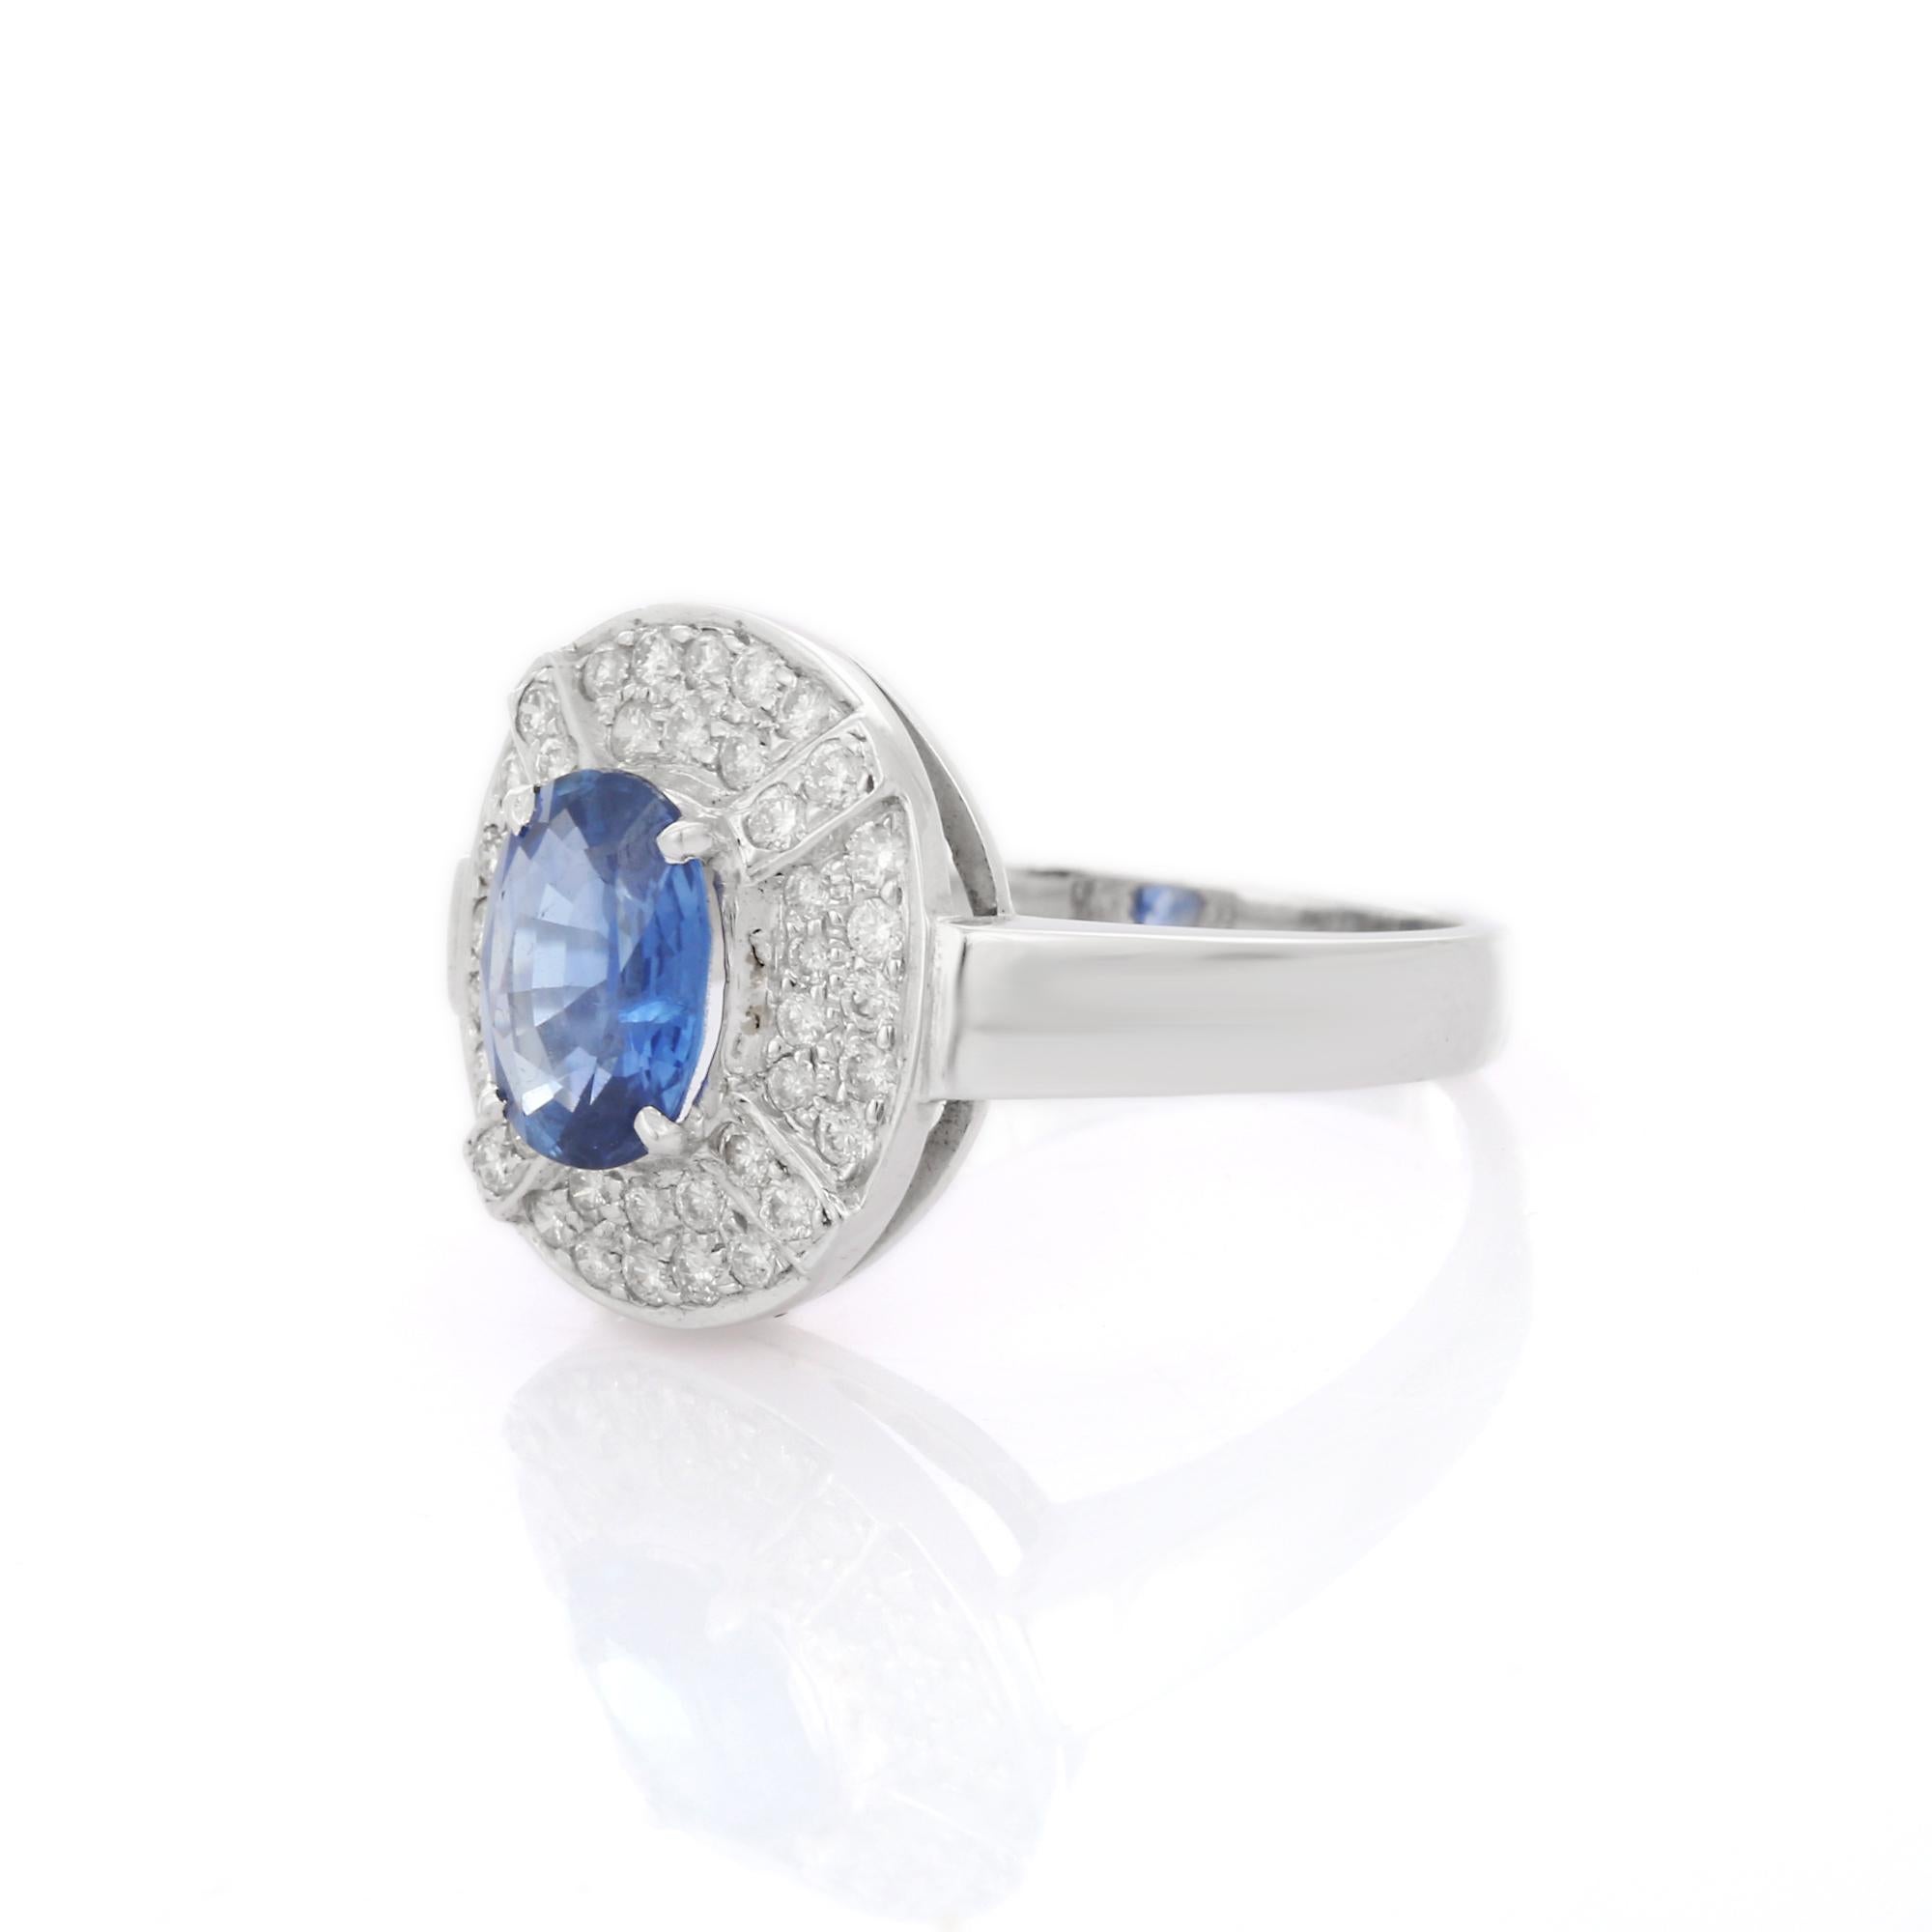 For Sale:  Art Deco Style 1.44 Ct Blue Sapphire Diamond Wedding Ring in 18K White Gold 2